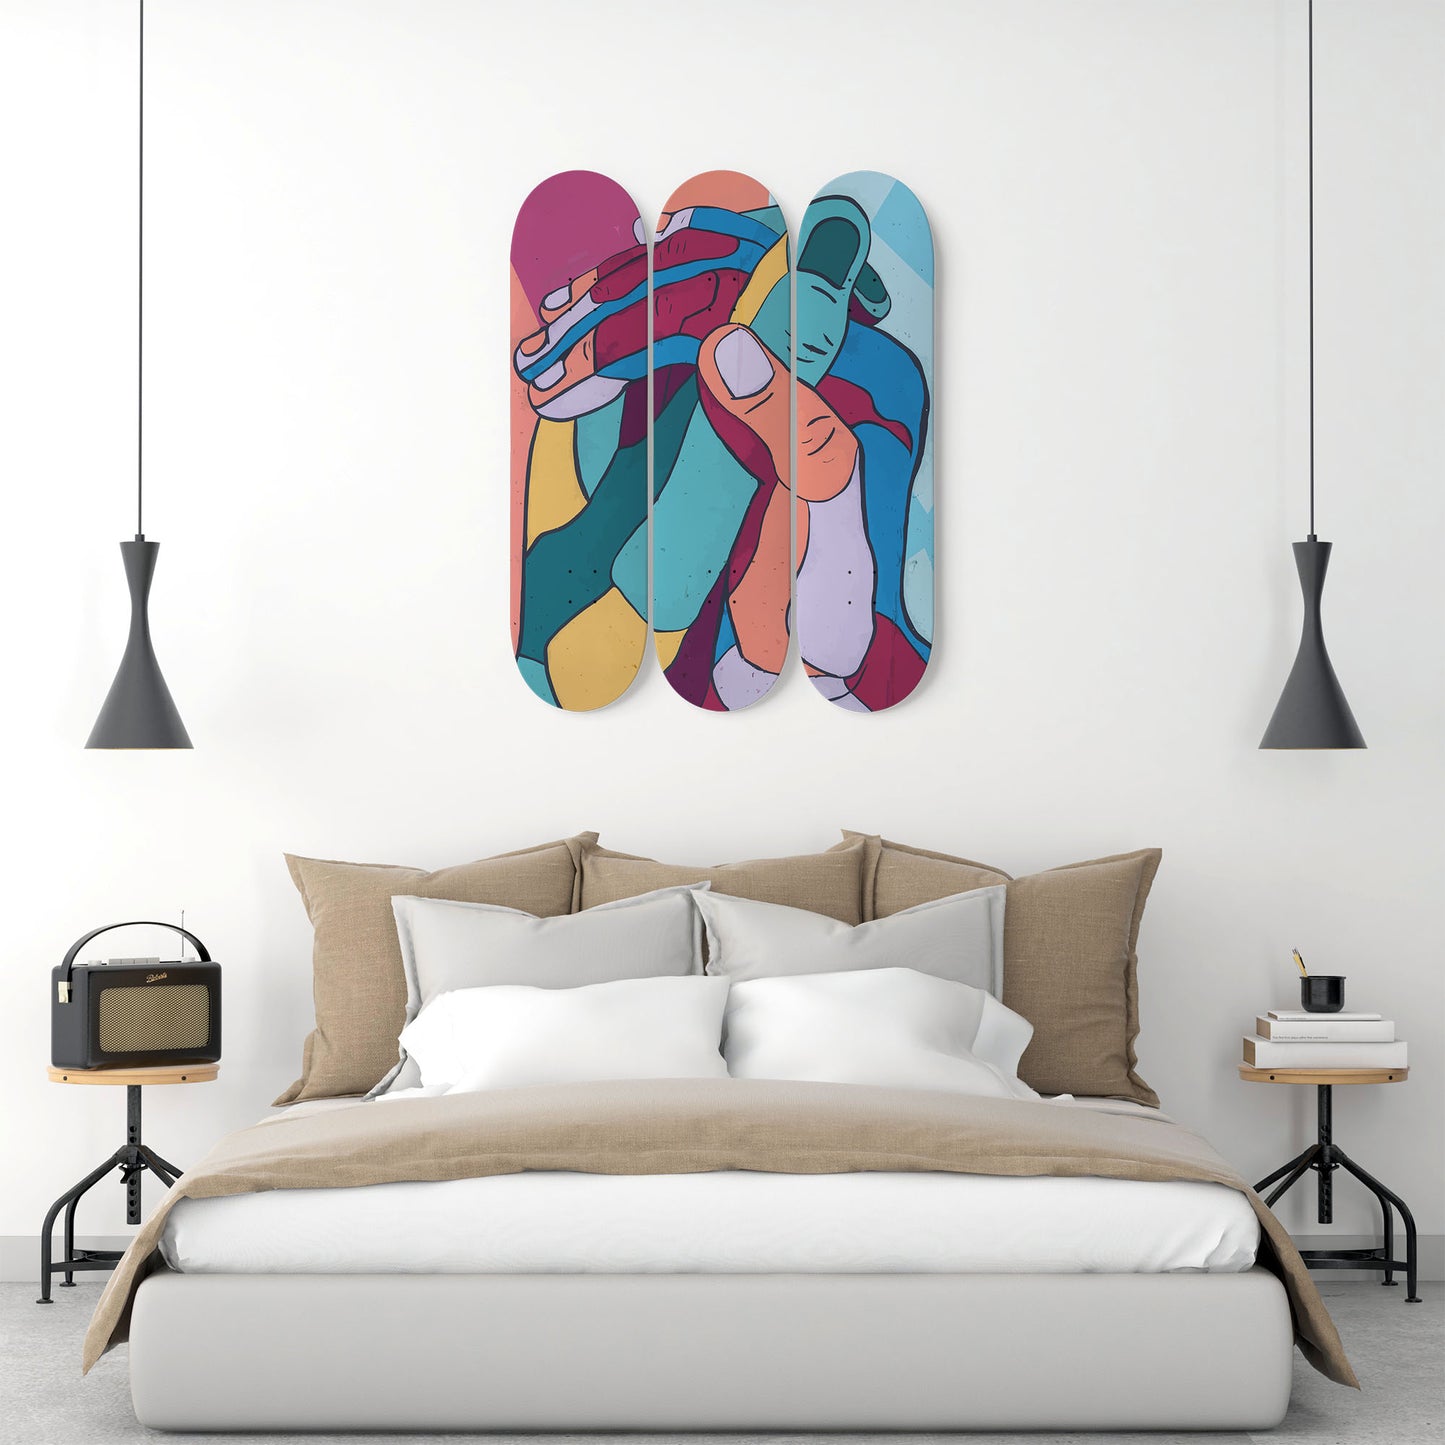 Random Colorful Artwork 18 | Skateboard Deck Wall Art, Wall Hanged Room Decoration, Maple Wood, Accent Gift for Home, Aesthetic Wall Art